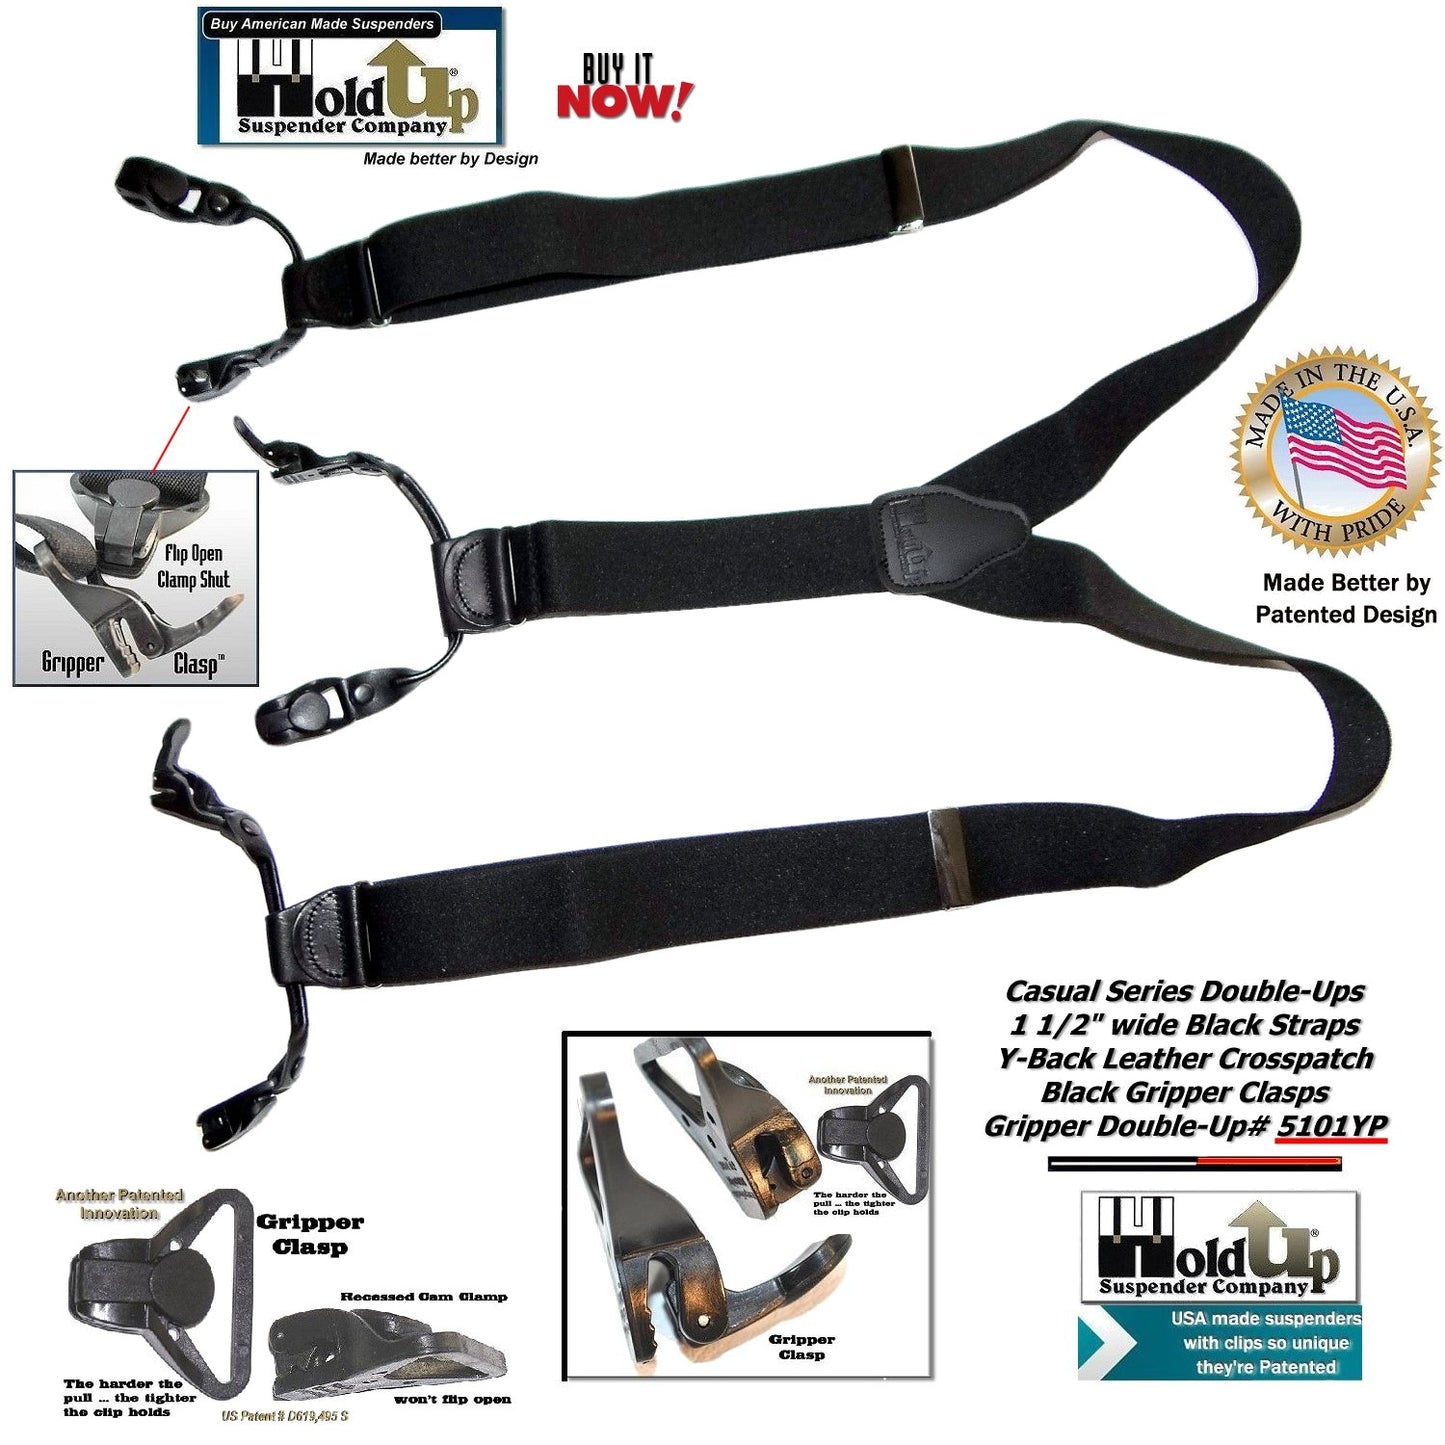 Holdup Brand Black Pack Gripper Clasp Double-Up Y-back Suspenders with Patented Gripper Clasps